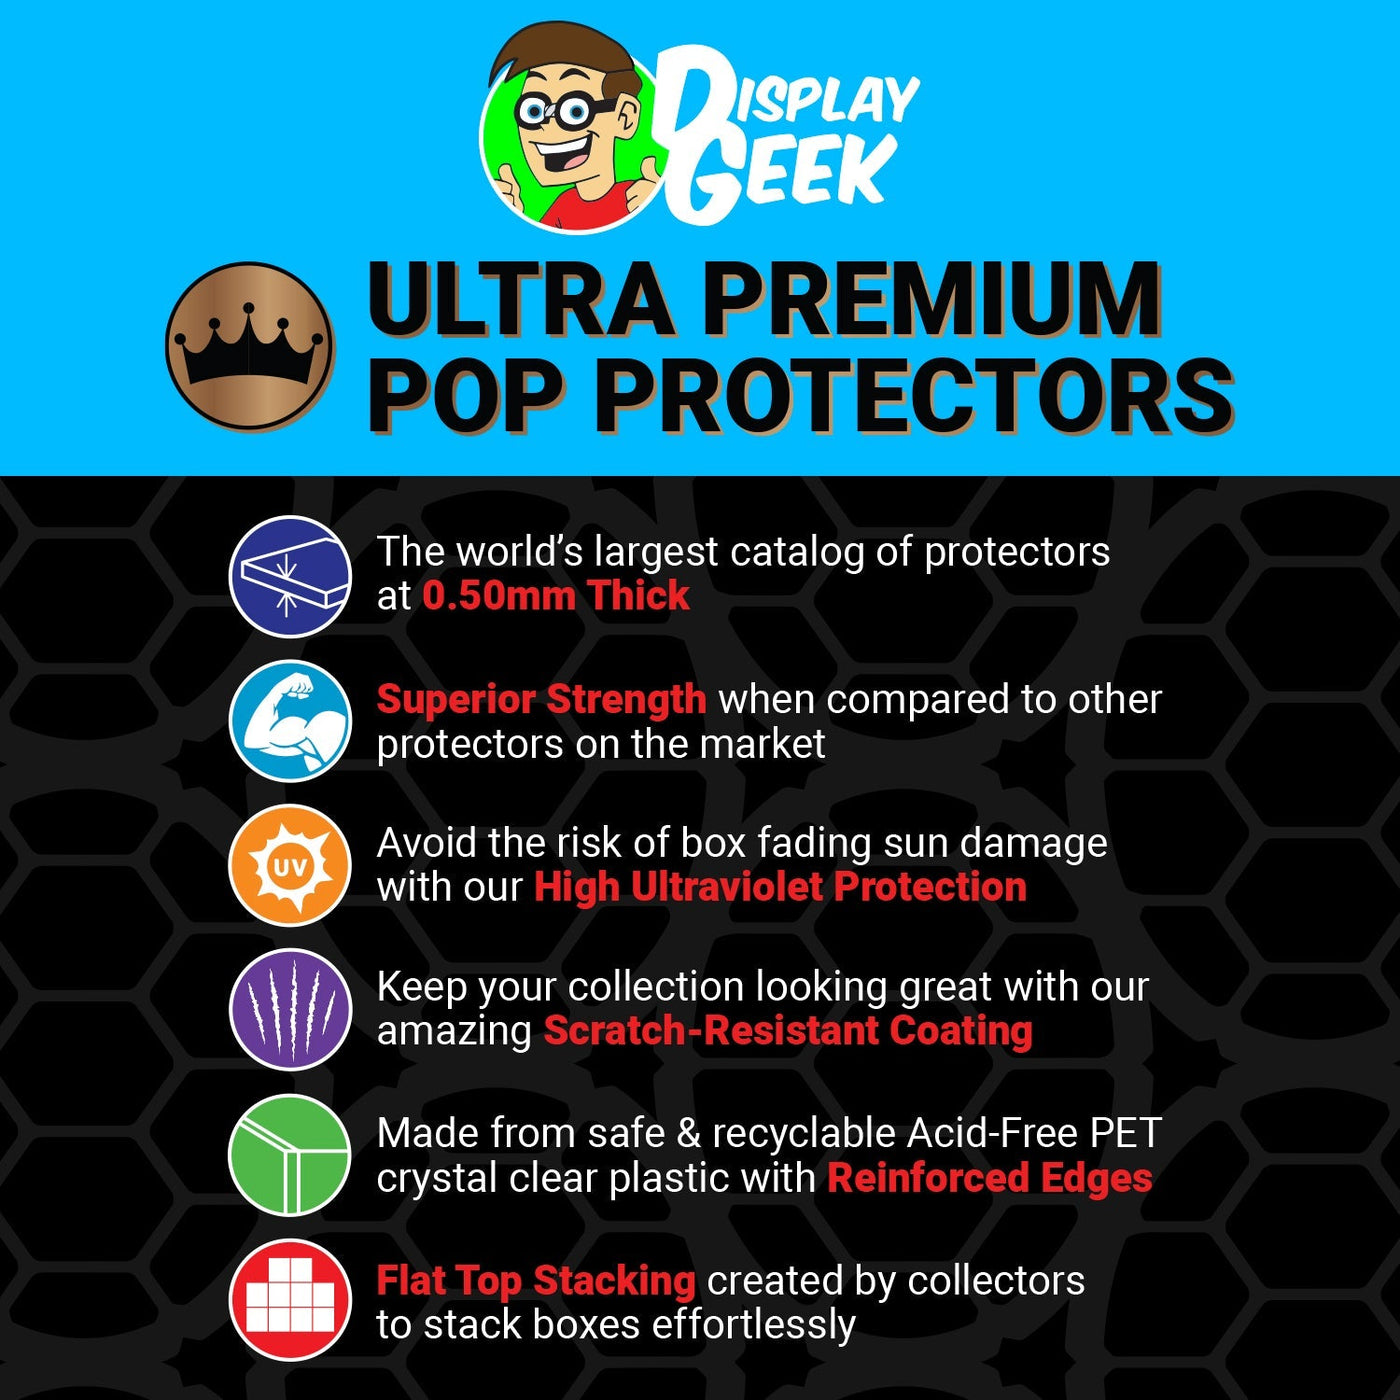 Pop Protector for The Amazing Spider-Man #40 Funko Pop Comic Covers on The Protector Guide App by Display Geek